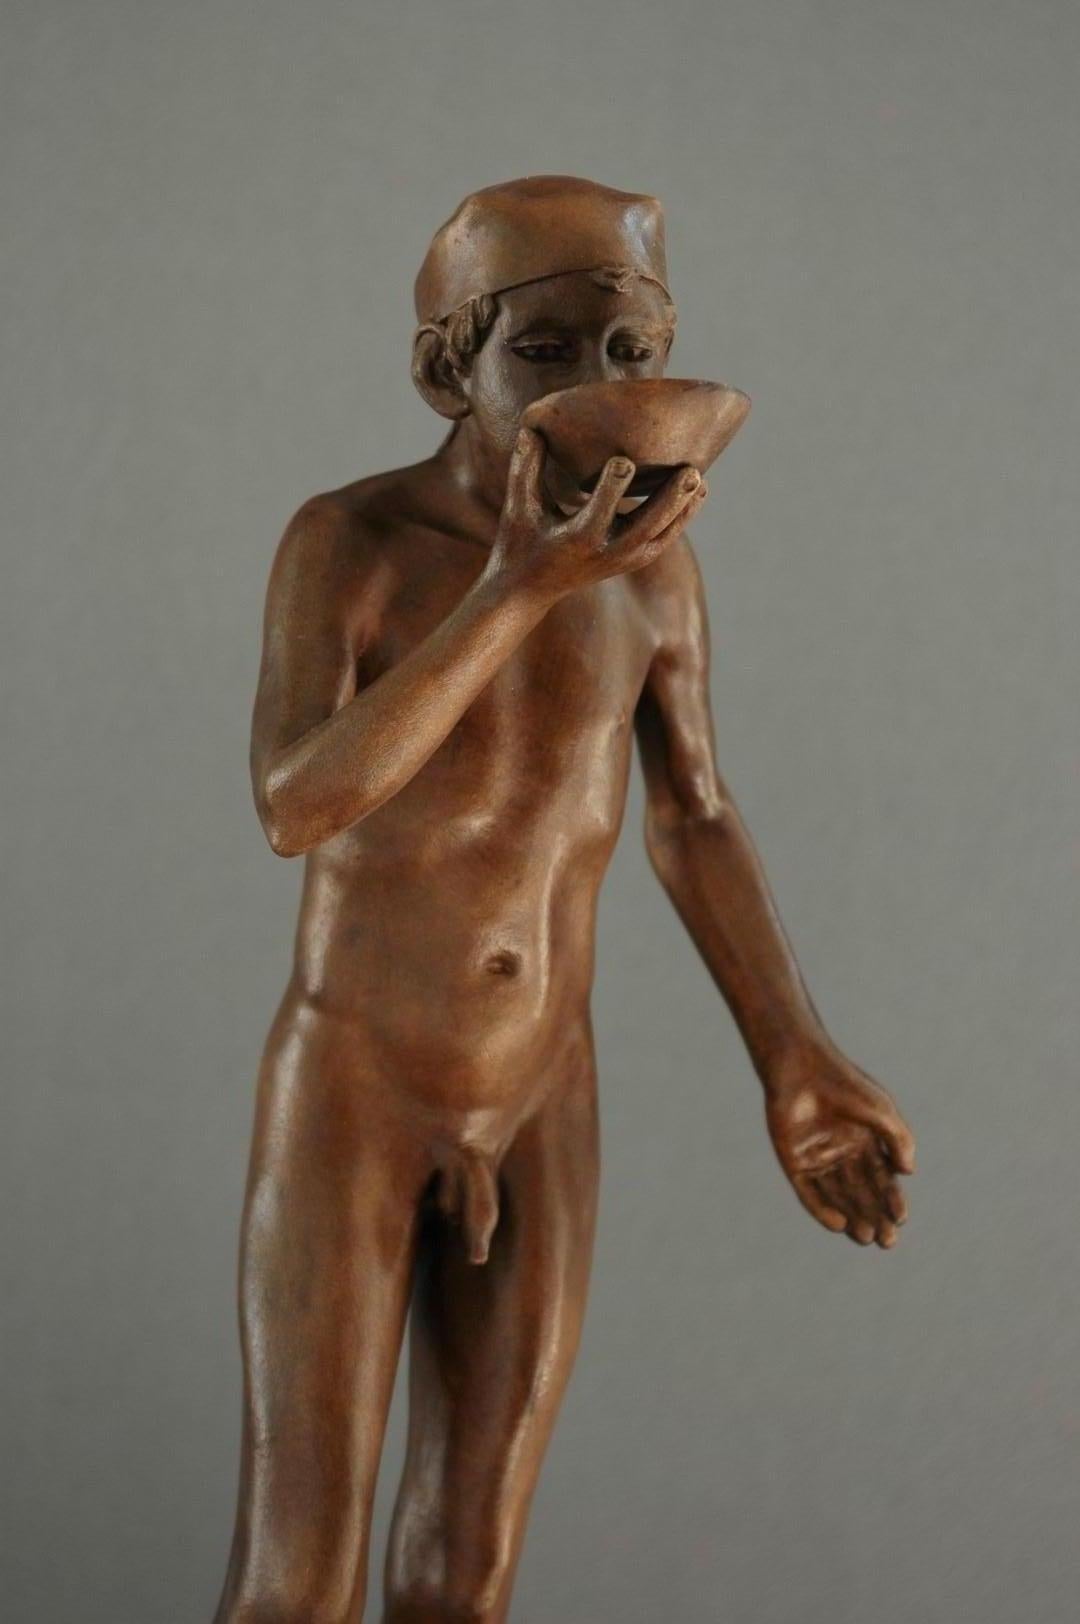 Sorbe Small Bronze Sculpture Nude Boy Drinking Male Figure Marble Stone

Wim van der Kant (1949, Kampen) is a selftaught artist. Next to his busy profession as a teacher at a high school, he intensively practises his profession as a sculptor. Only